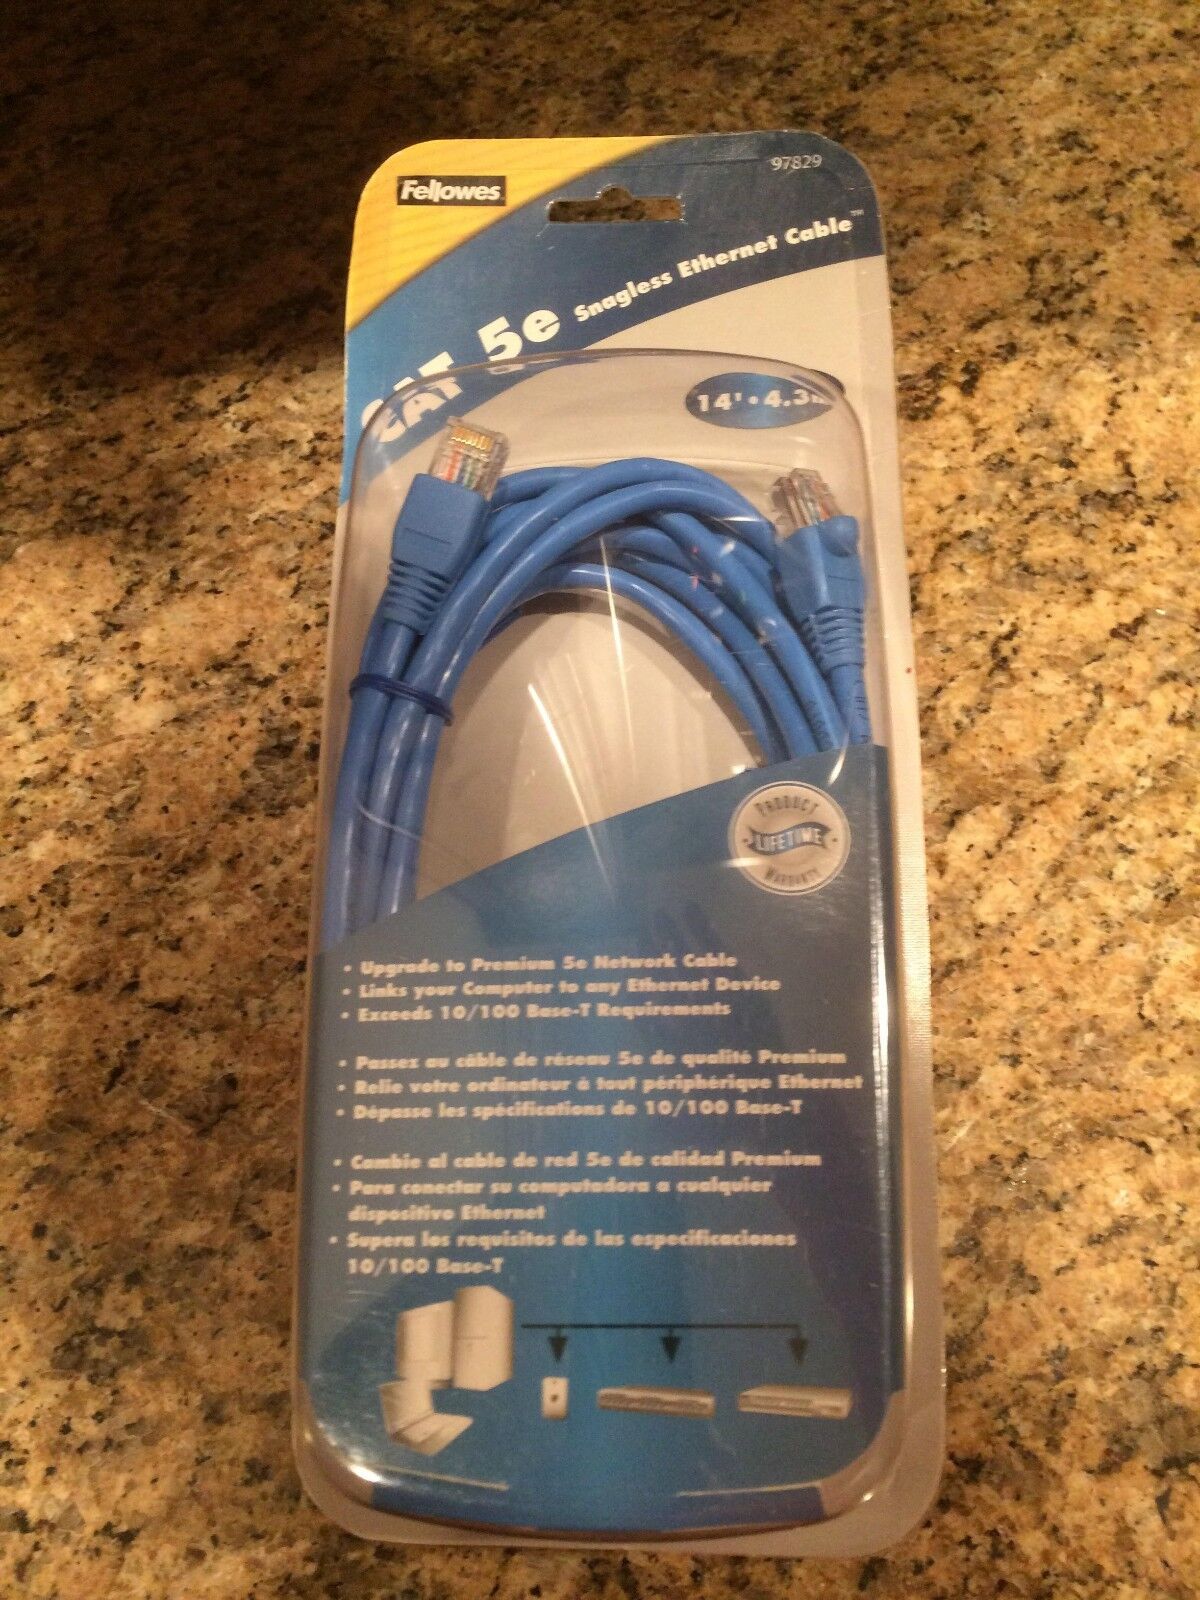 Fellowes 14FT CAT 5E SNAGLESS BLUE ETHERNET CABLE( 97829 ); NIB